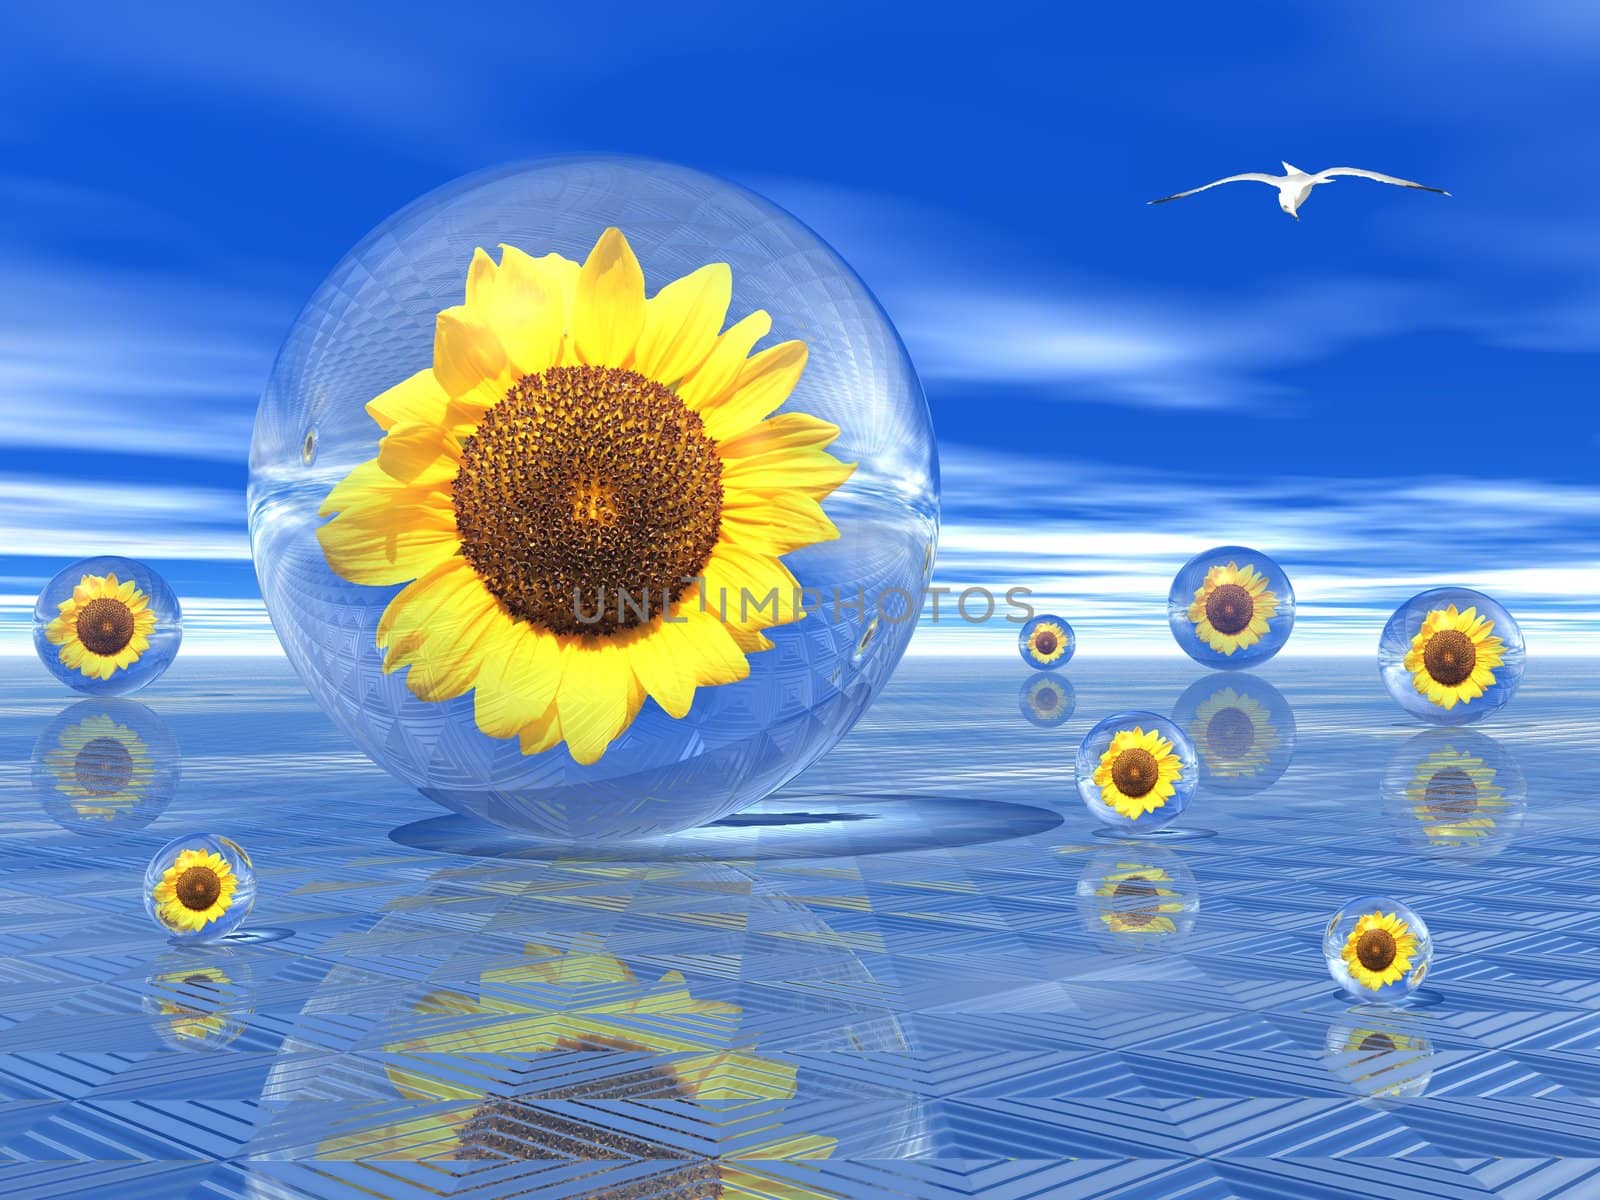 Sunflowers in transparent bubbles upon a blue modern ground and with a seagull flying in the blue sky